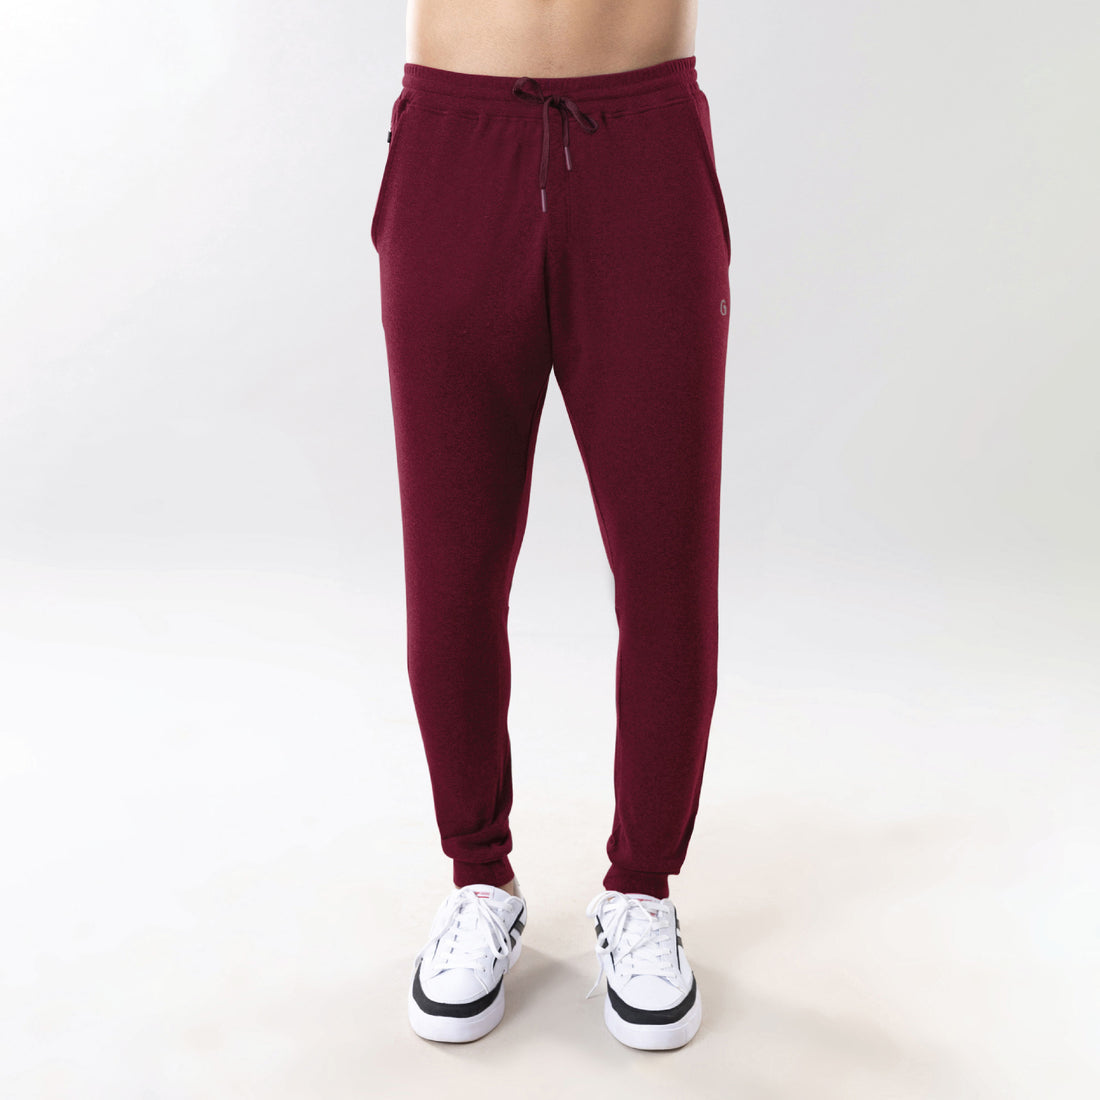 Women's Casual Jogger Pants High Waisted Sweatpants Two Tone Color Block  Lounge Pants Athletic Workout Joggers Pants